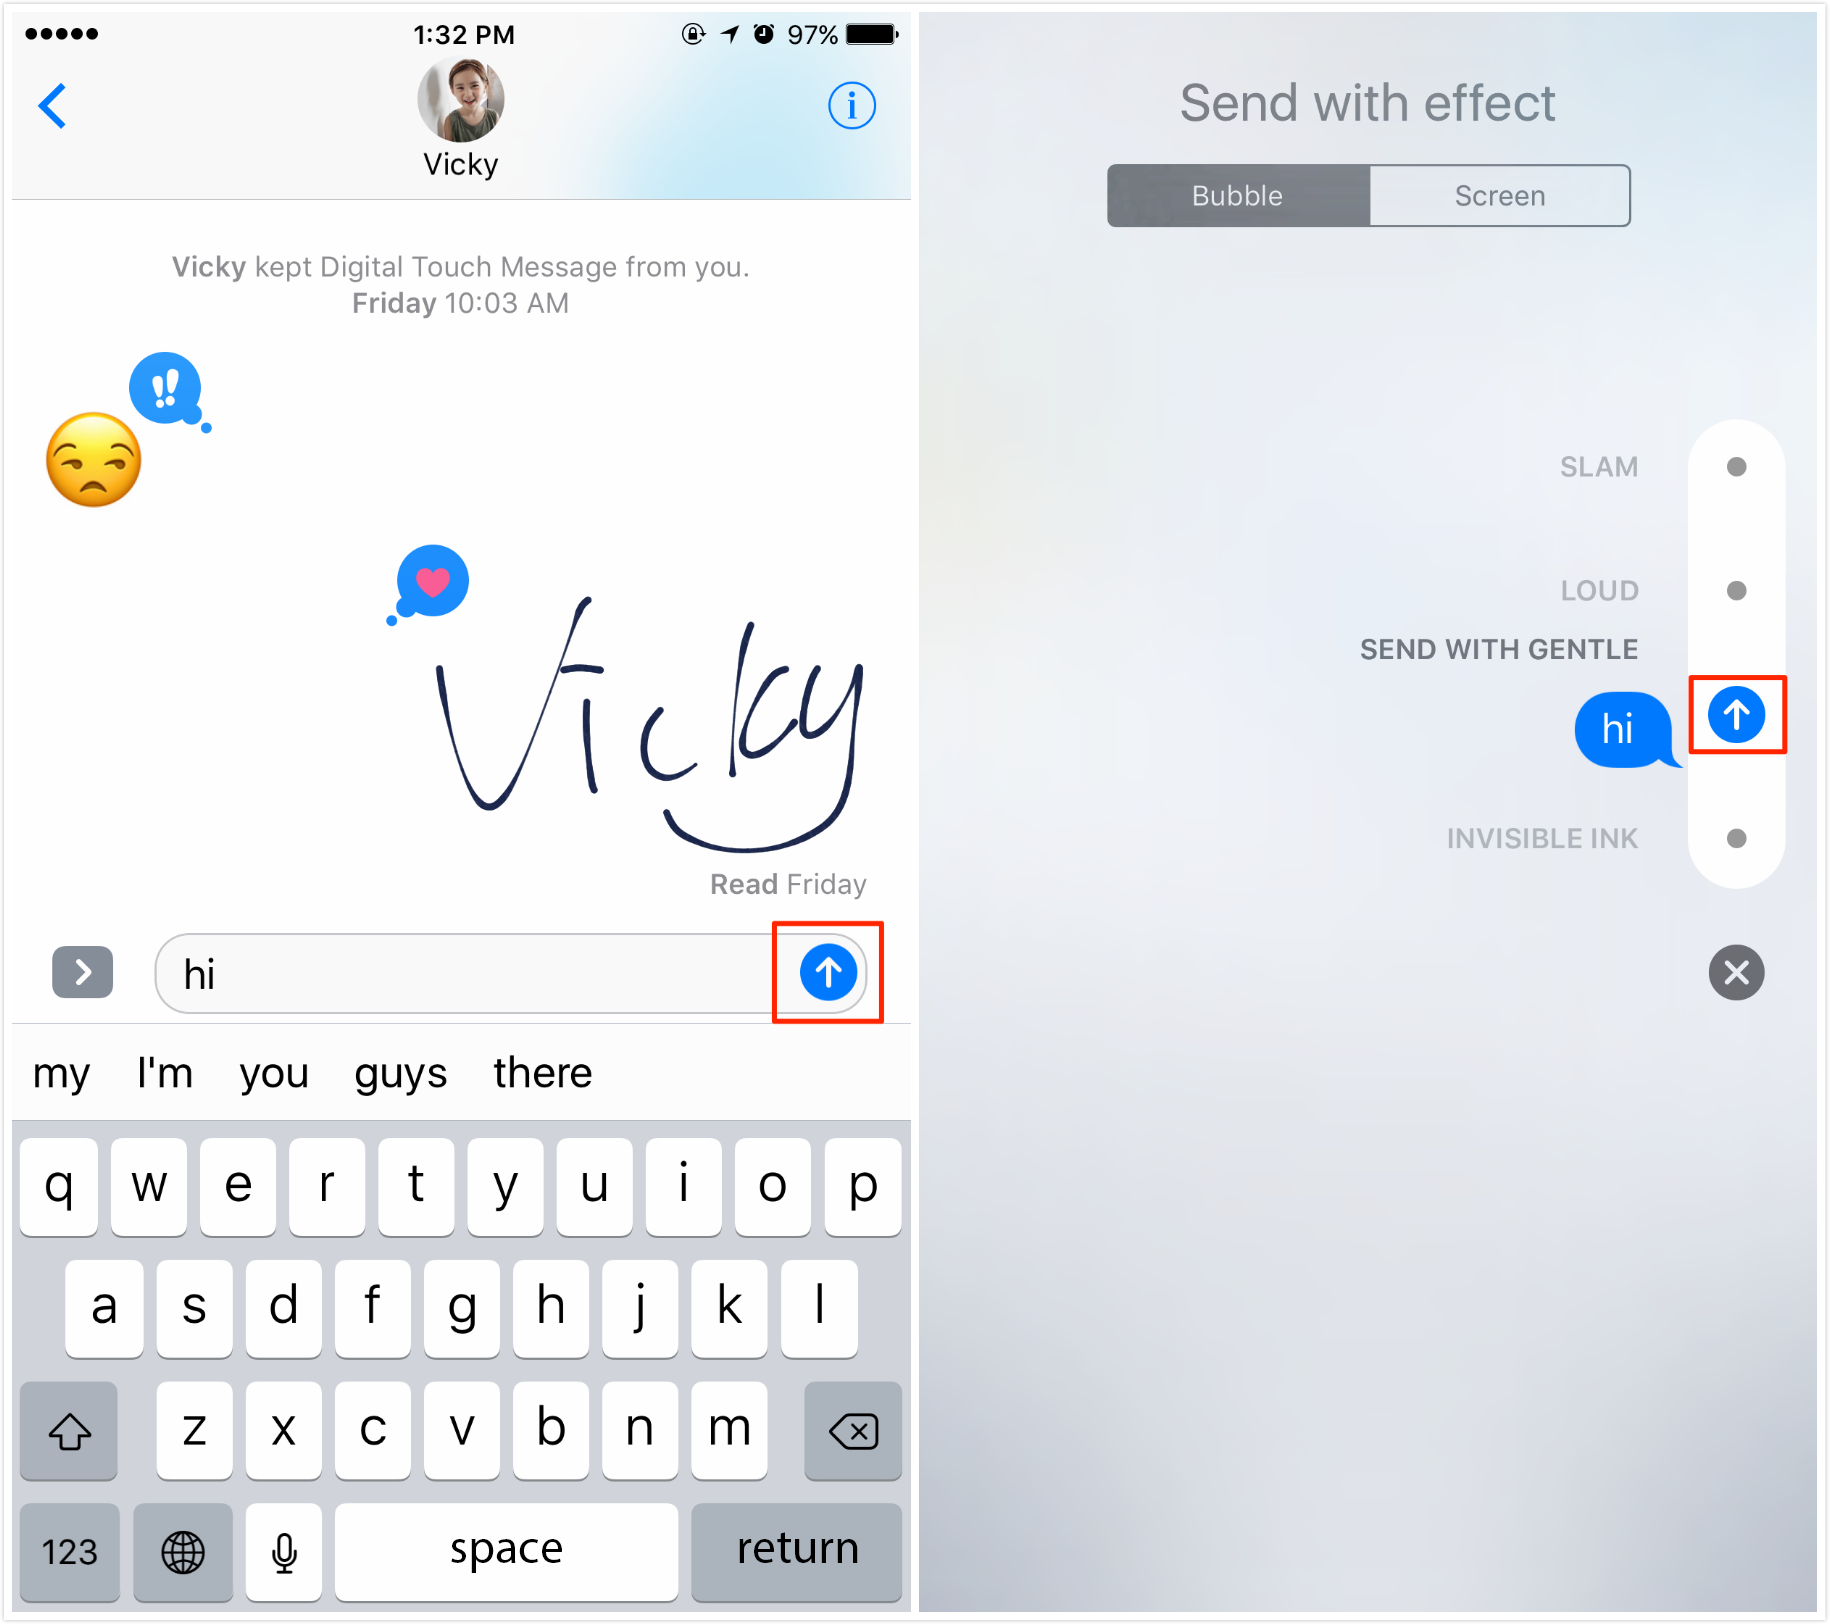 How to Send Gentle Effect iMessage on iOS 11/12